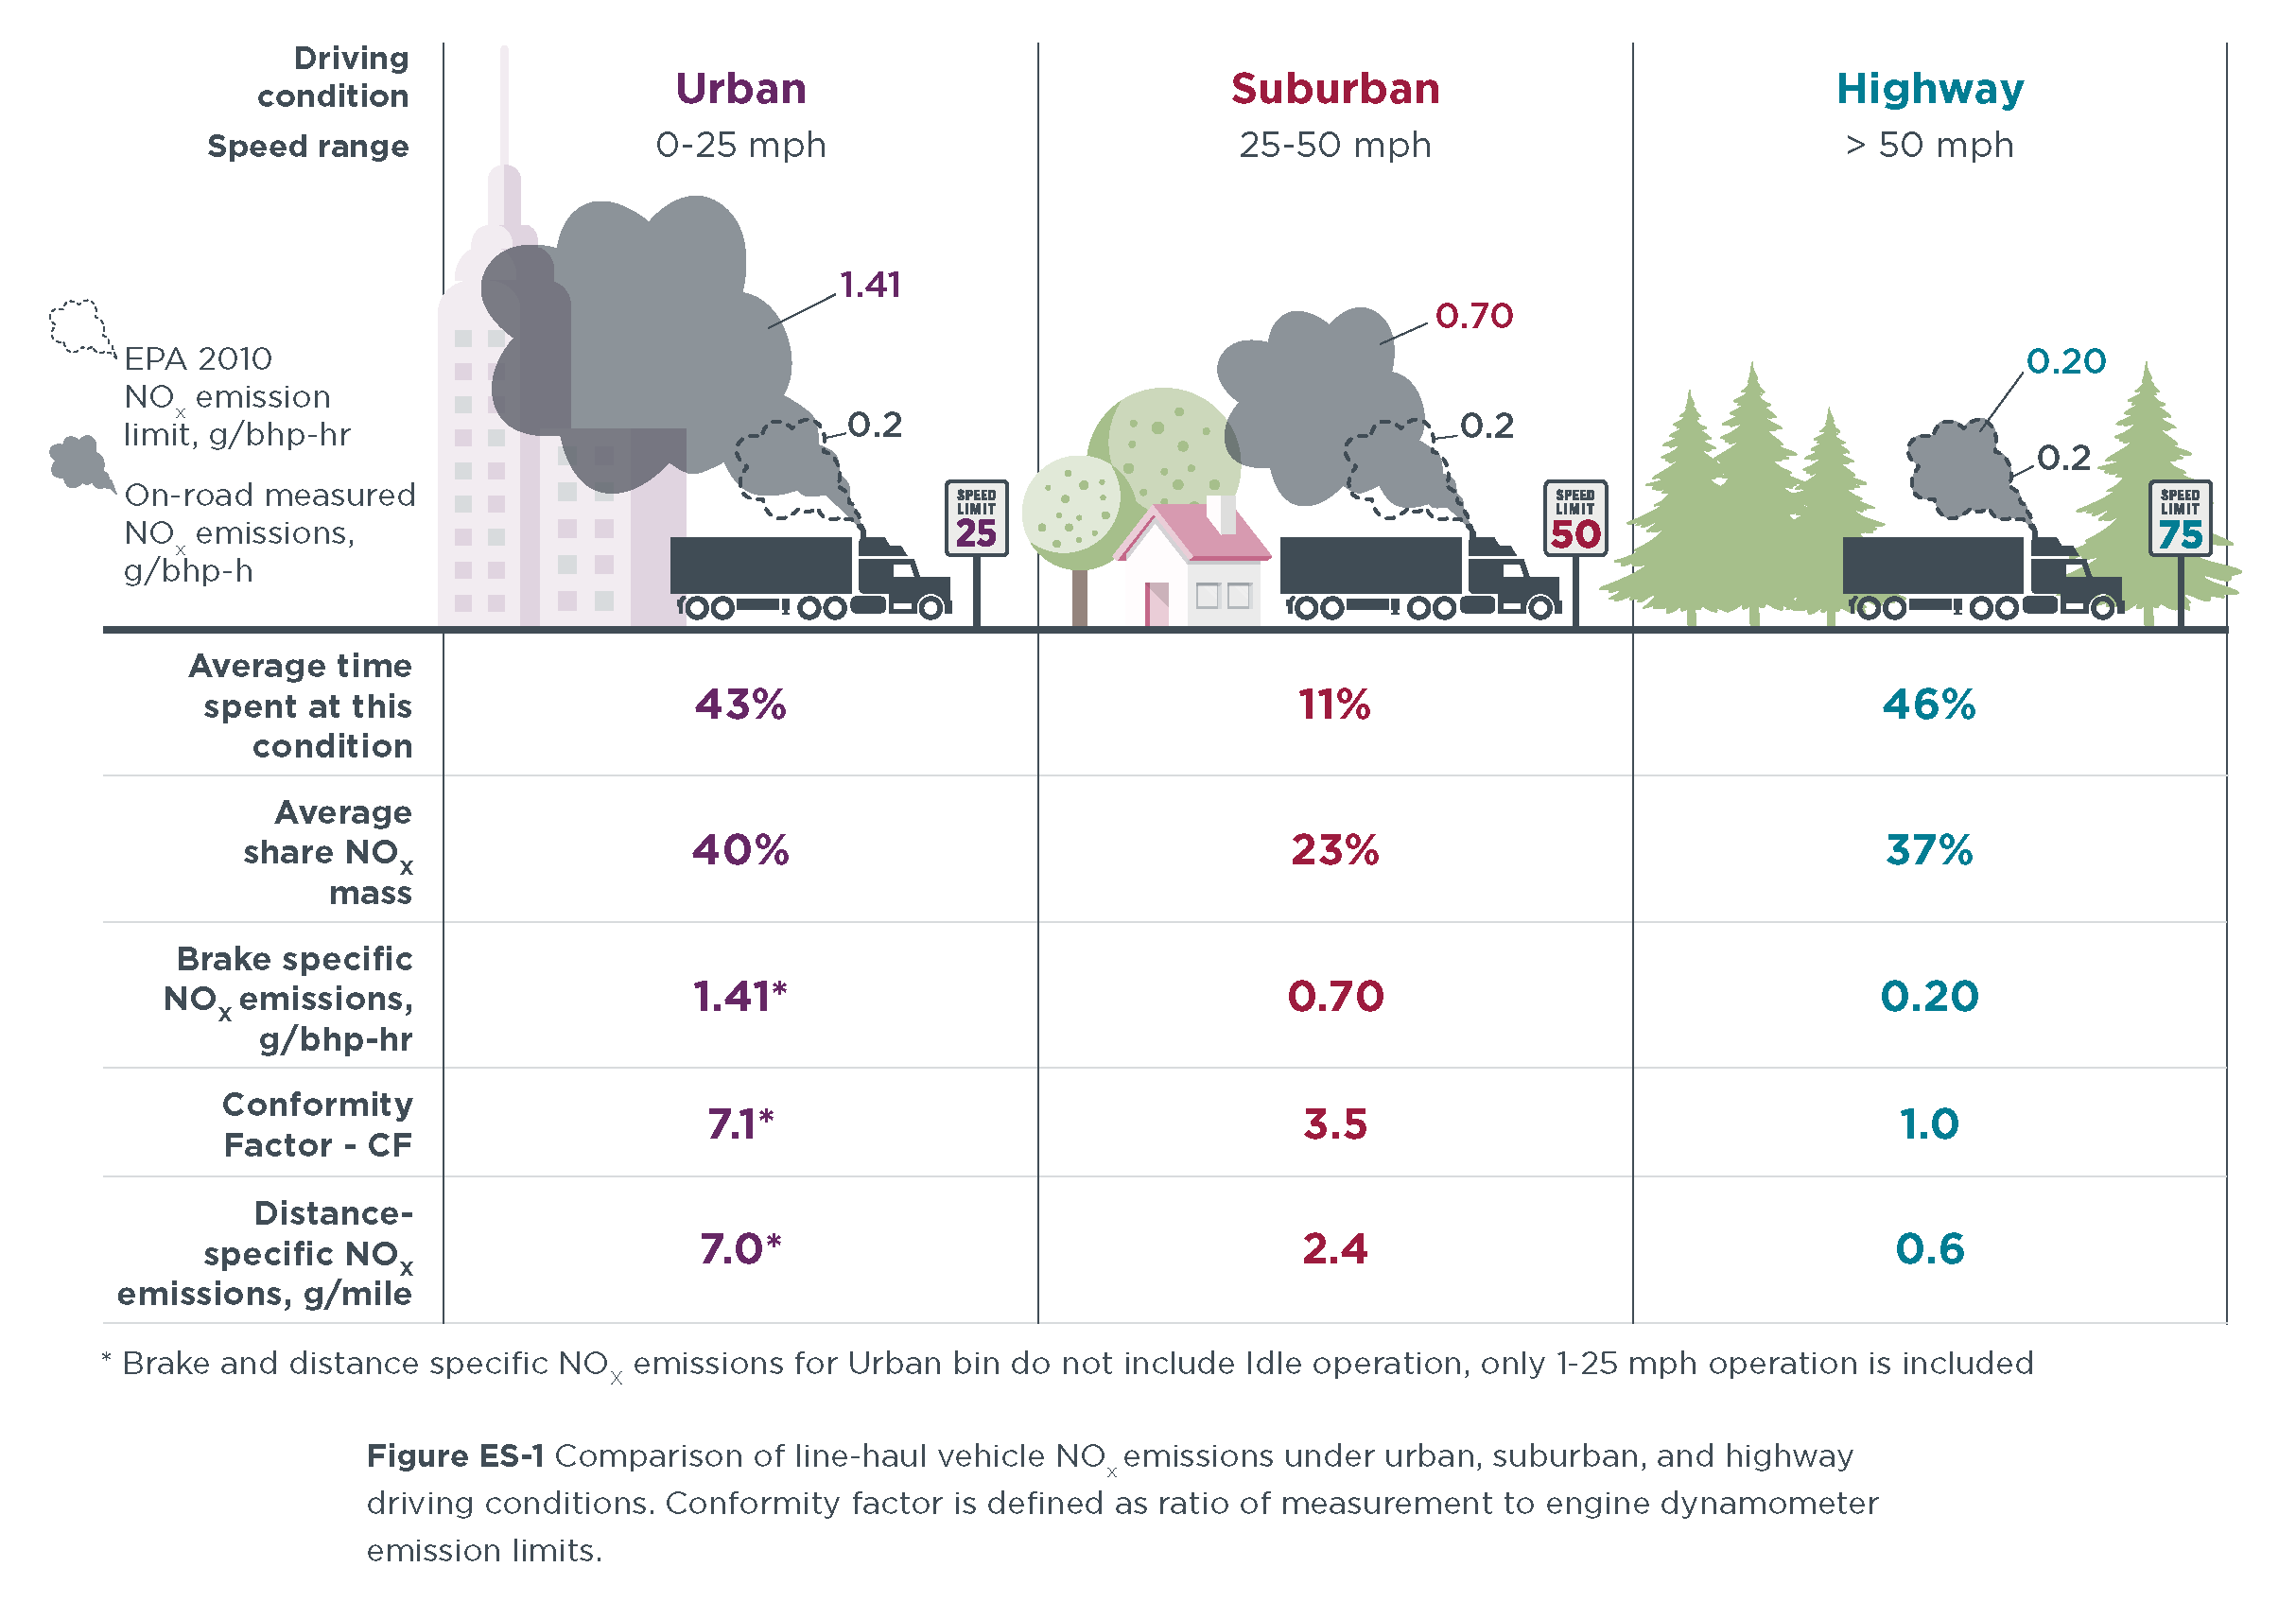 NOx emissions in urban, suburban, and highway driving